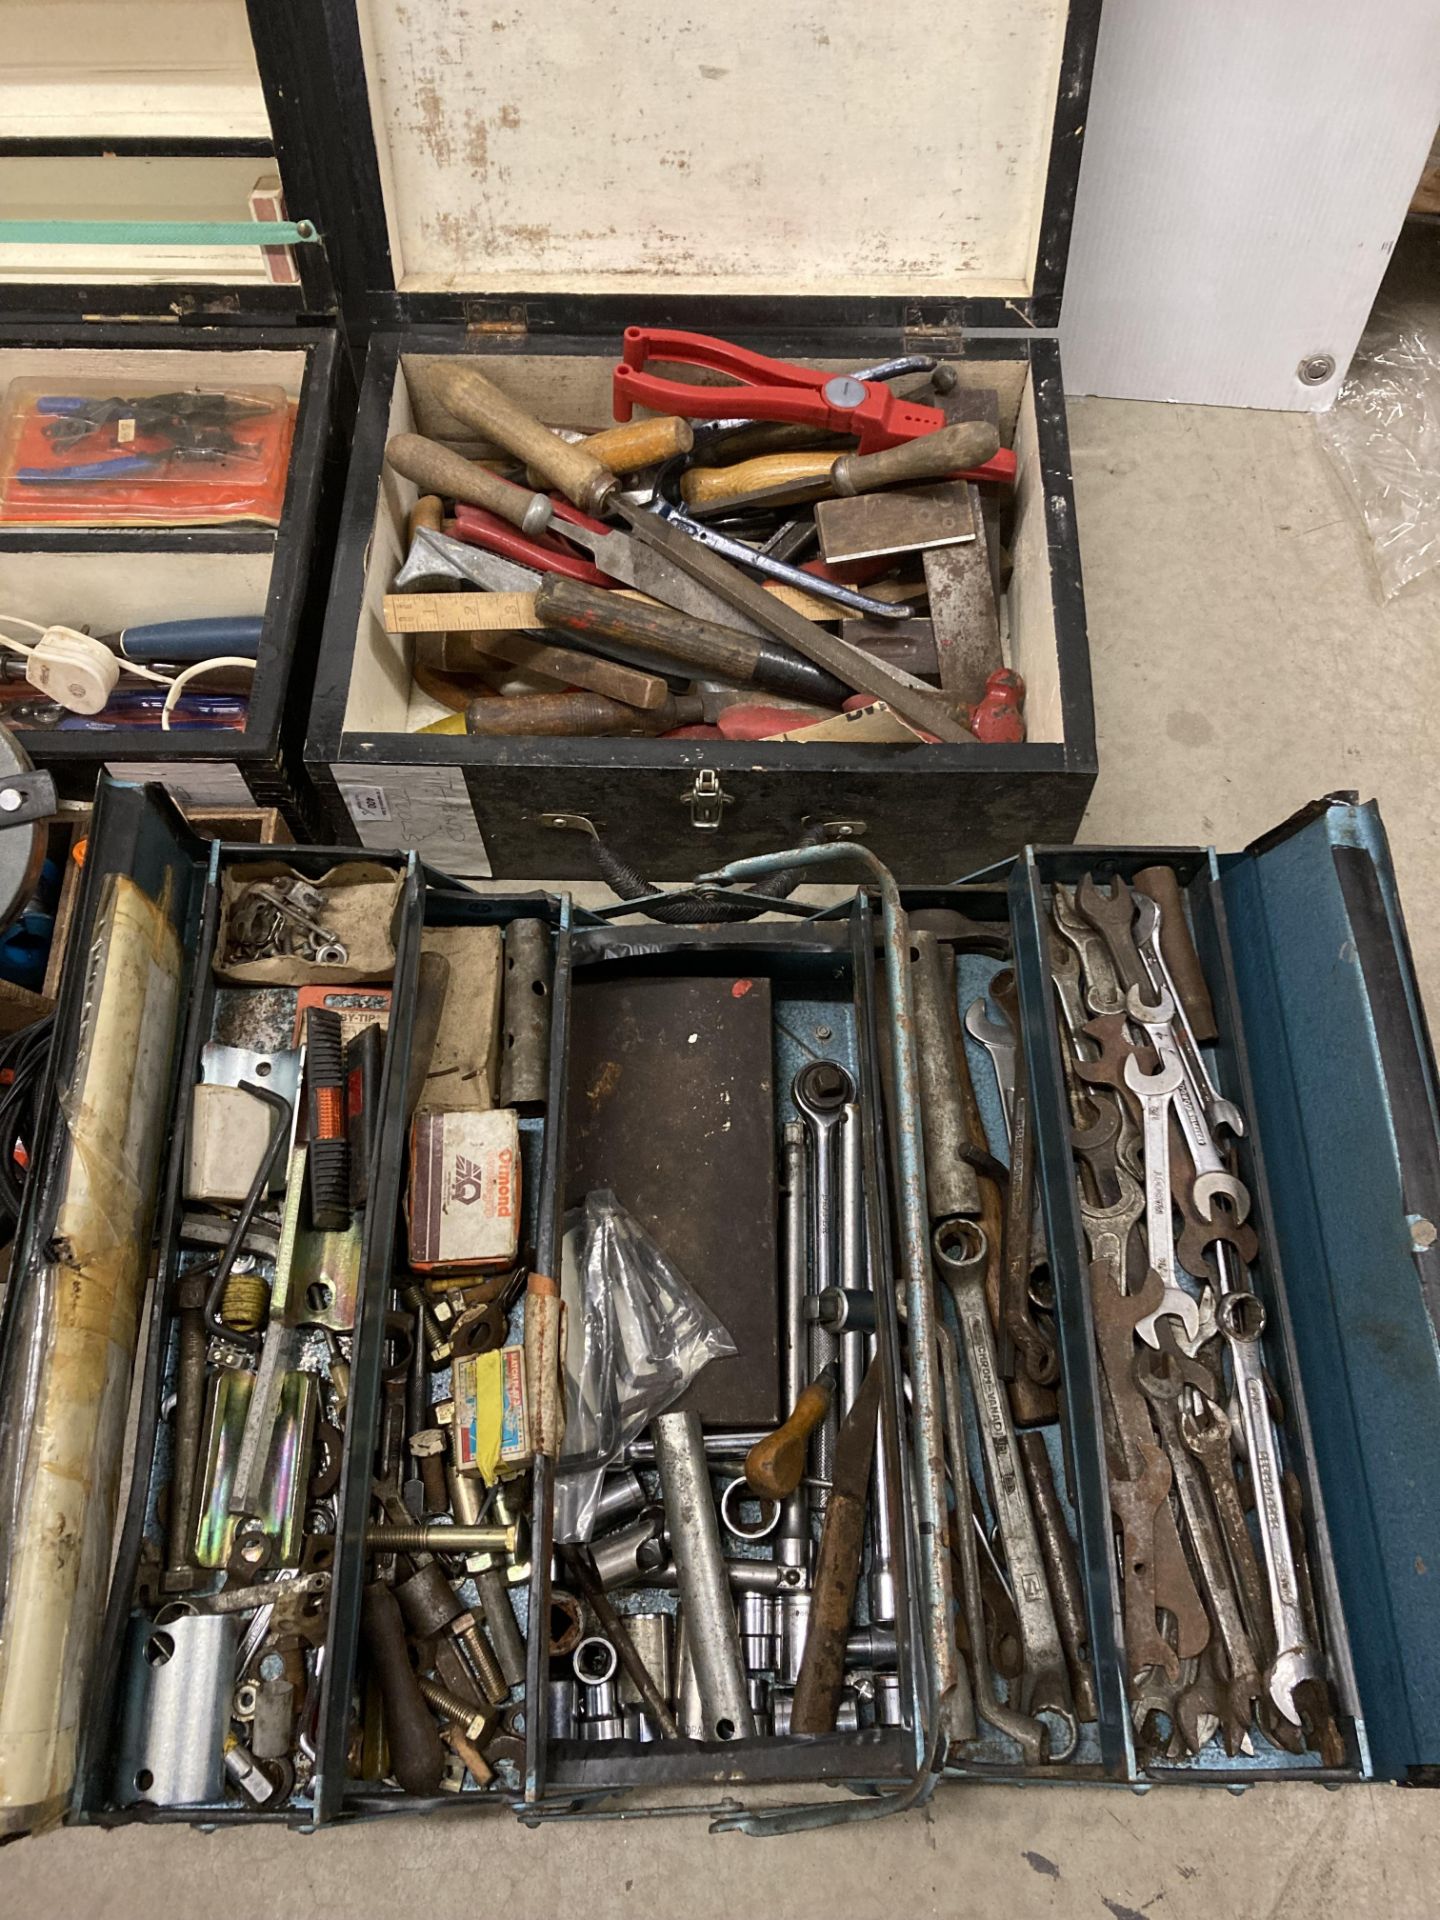 3 x assorted tool boxes and hand tools including spanners, screwdrivers, chisels, hammers, - Image 3 of 3